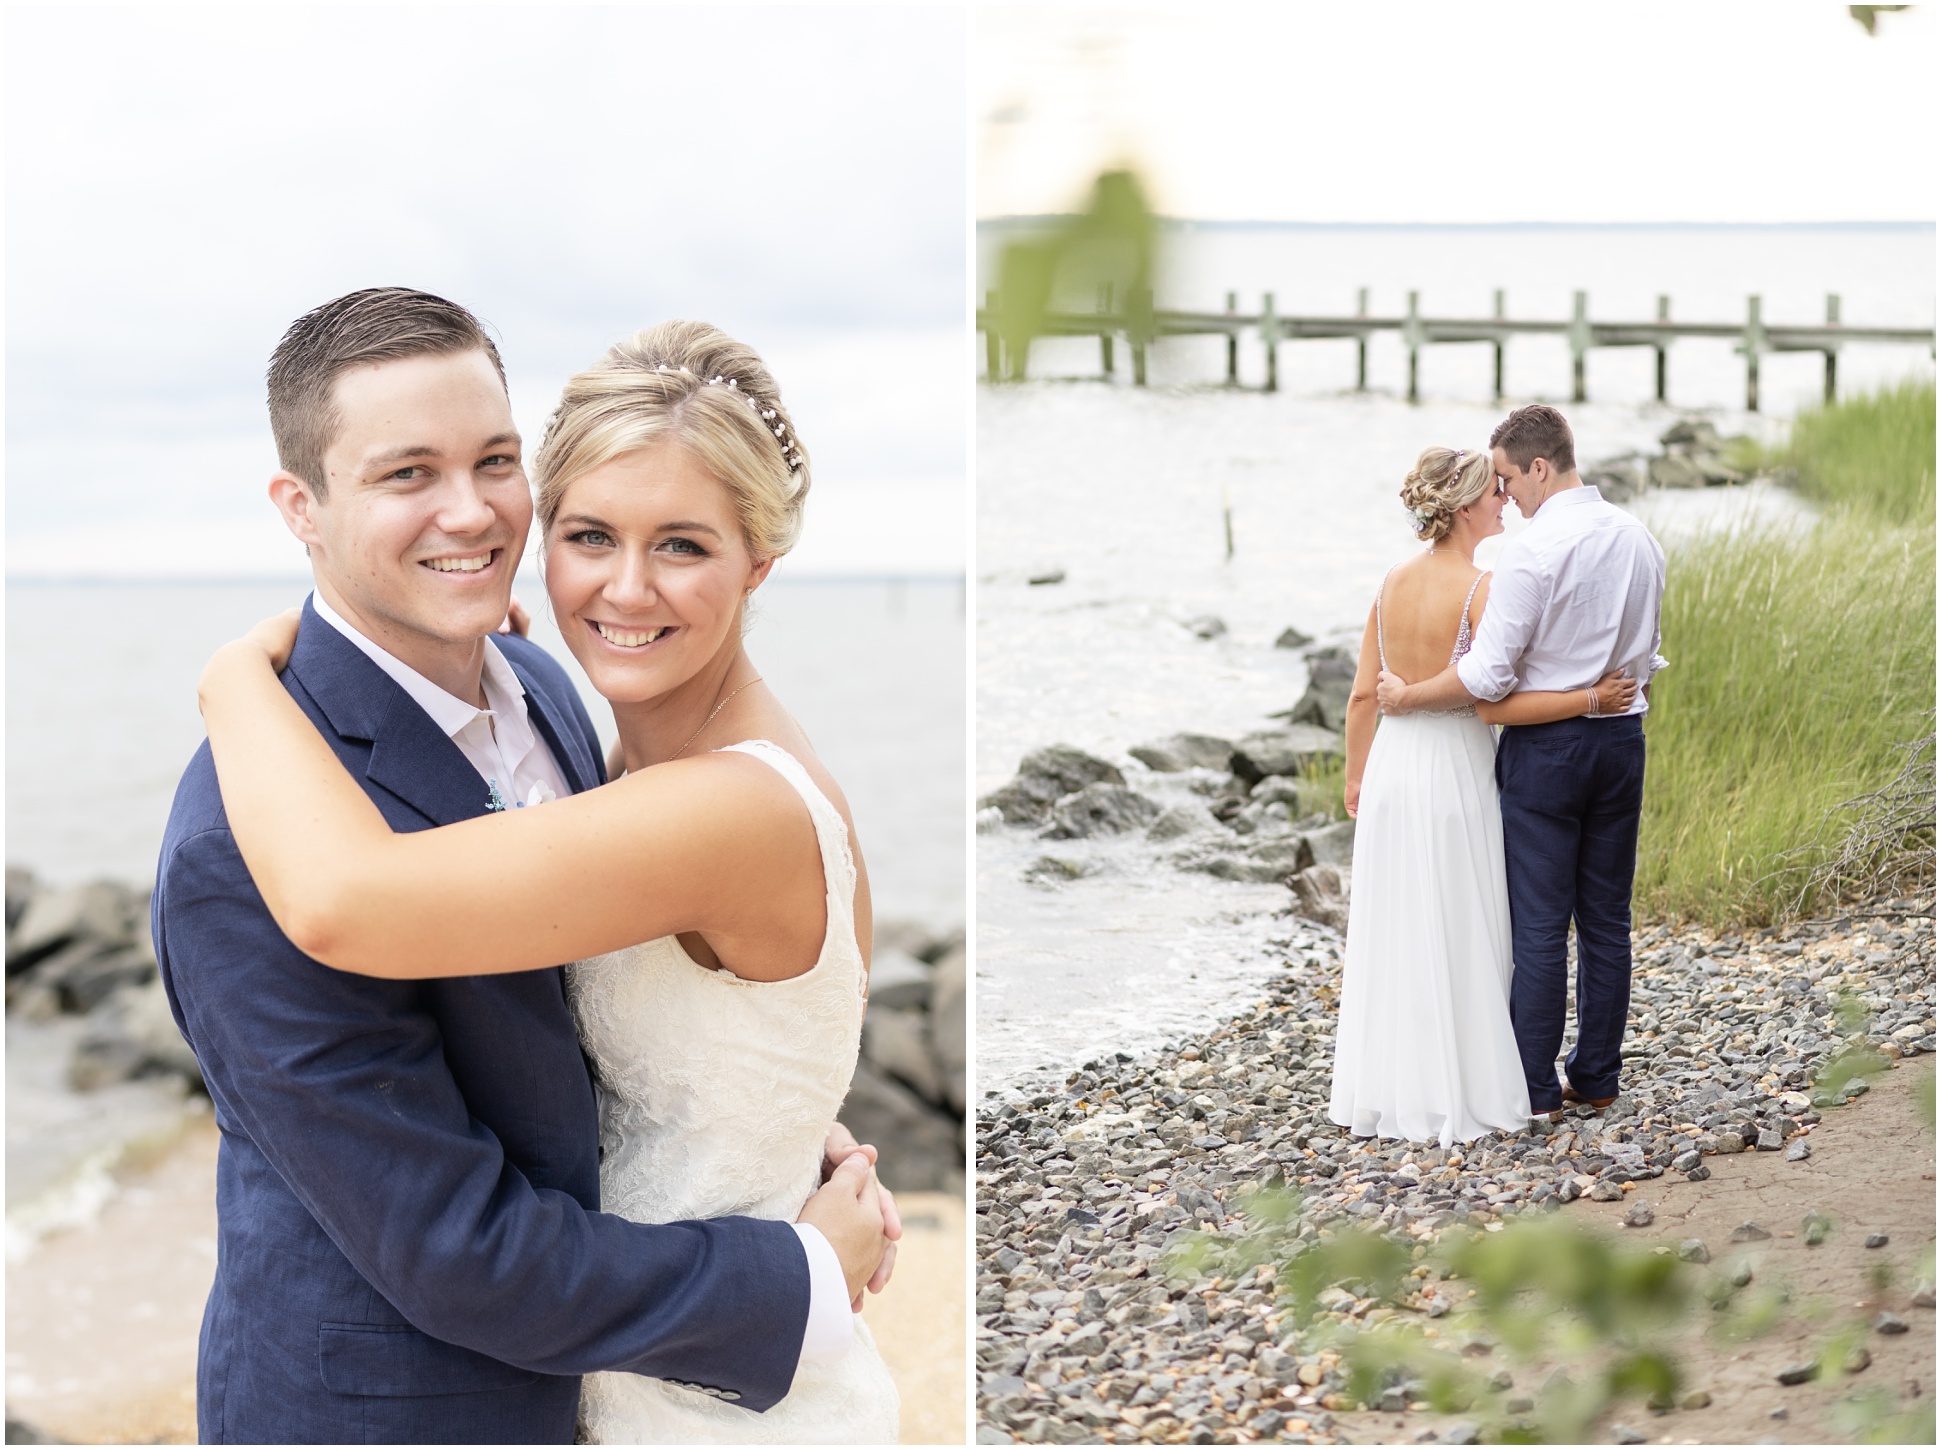 Two images of the bride and groom down on the beach at weatherly farms